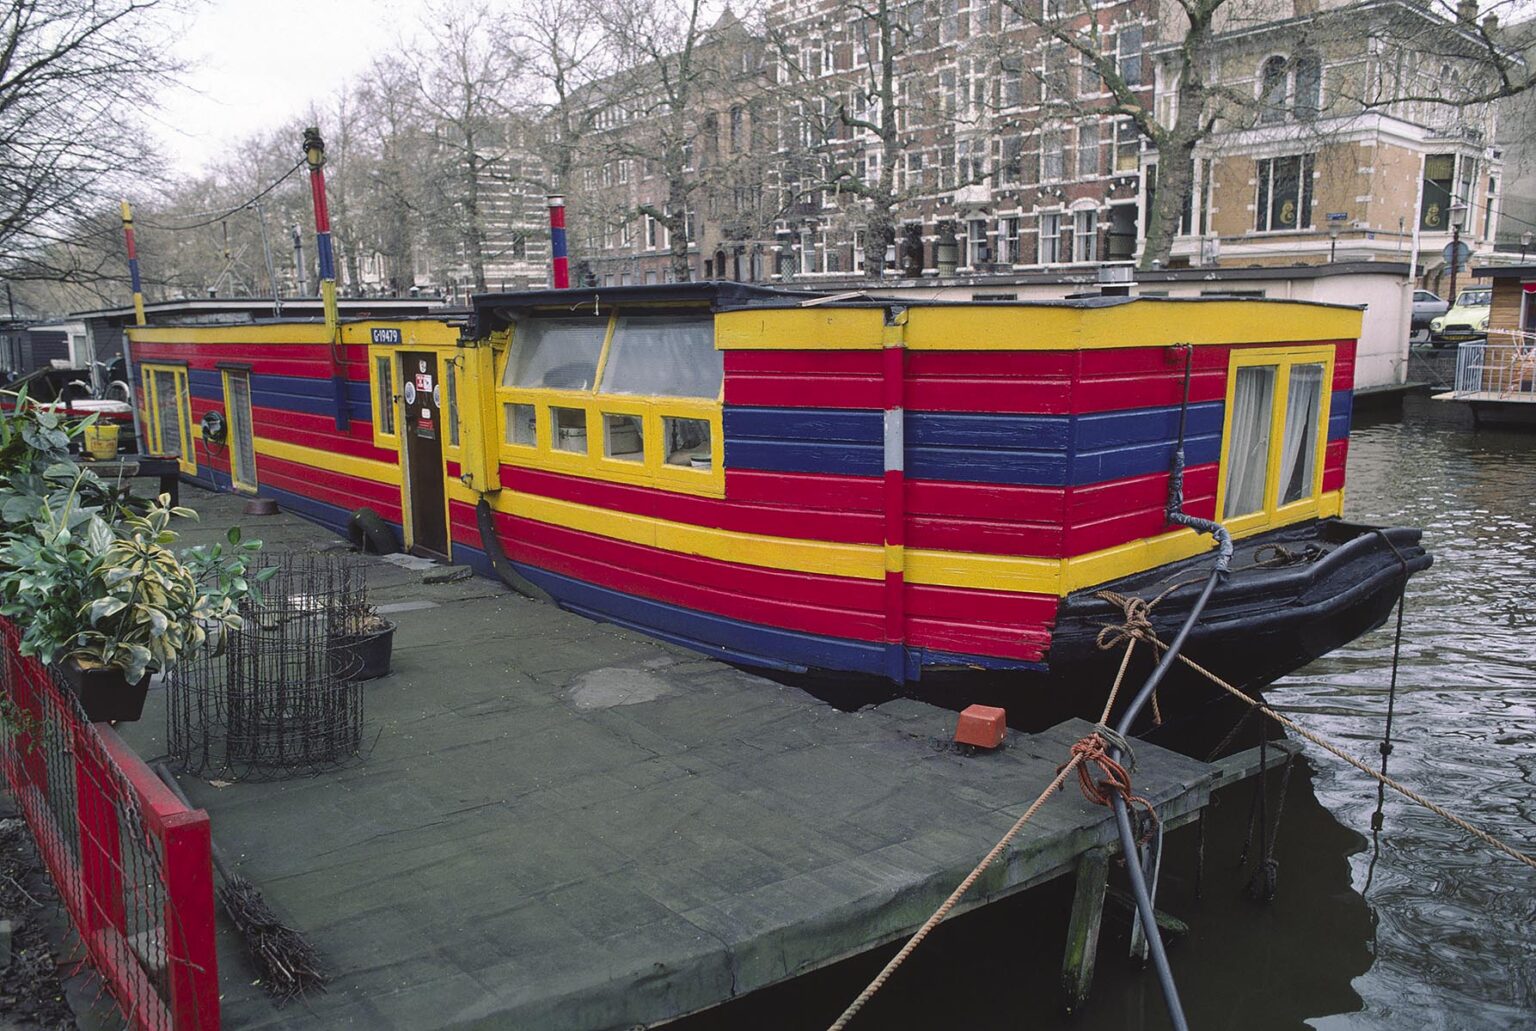 A HOUSEBOAT with a beautiful red, yellow & blue paint job is docked on a CANAL in AMSTERDAM